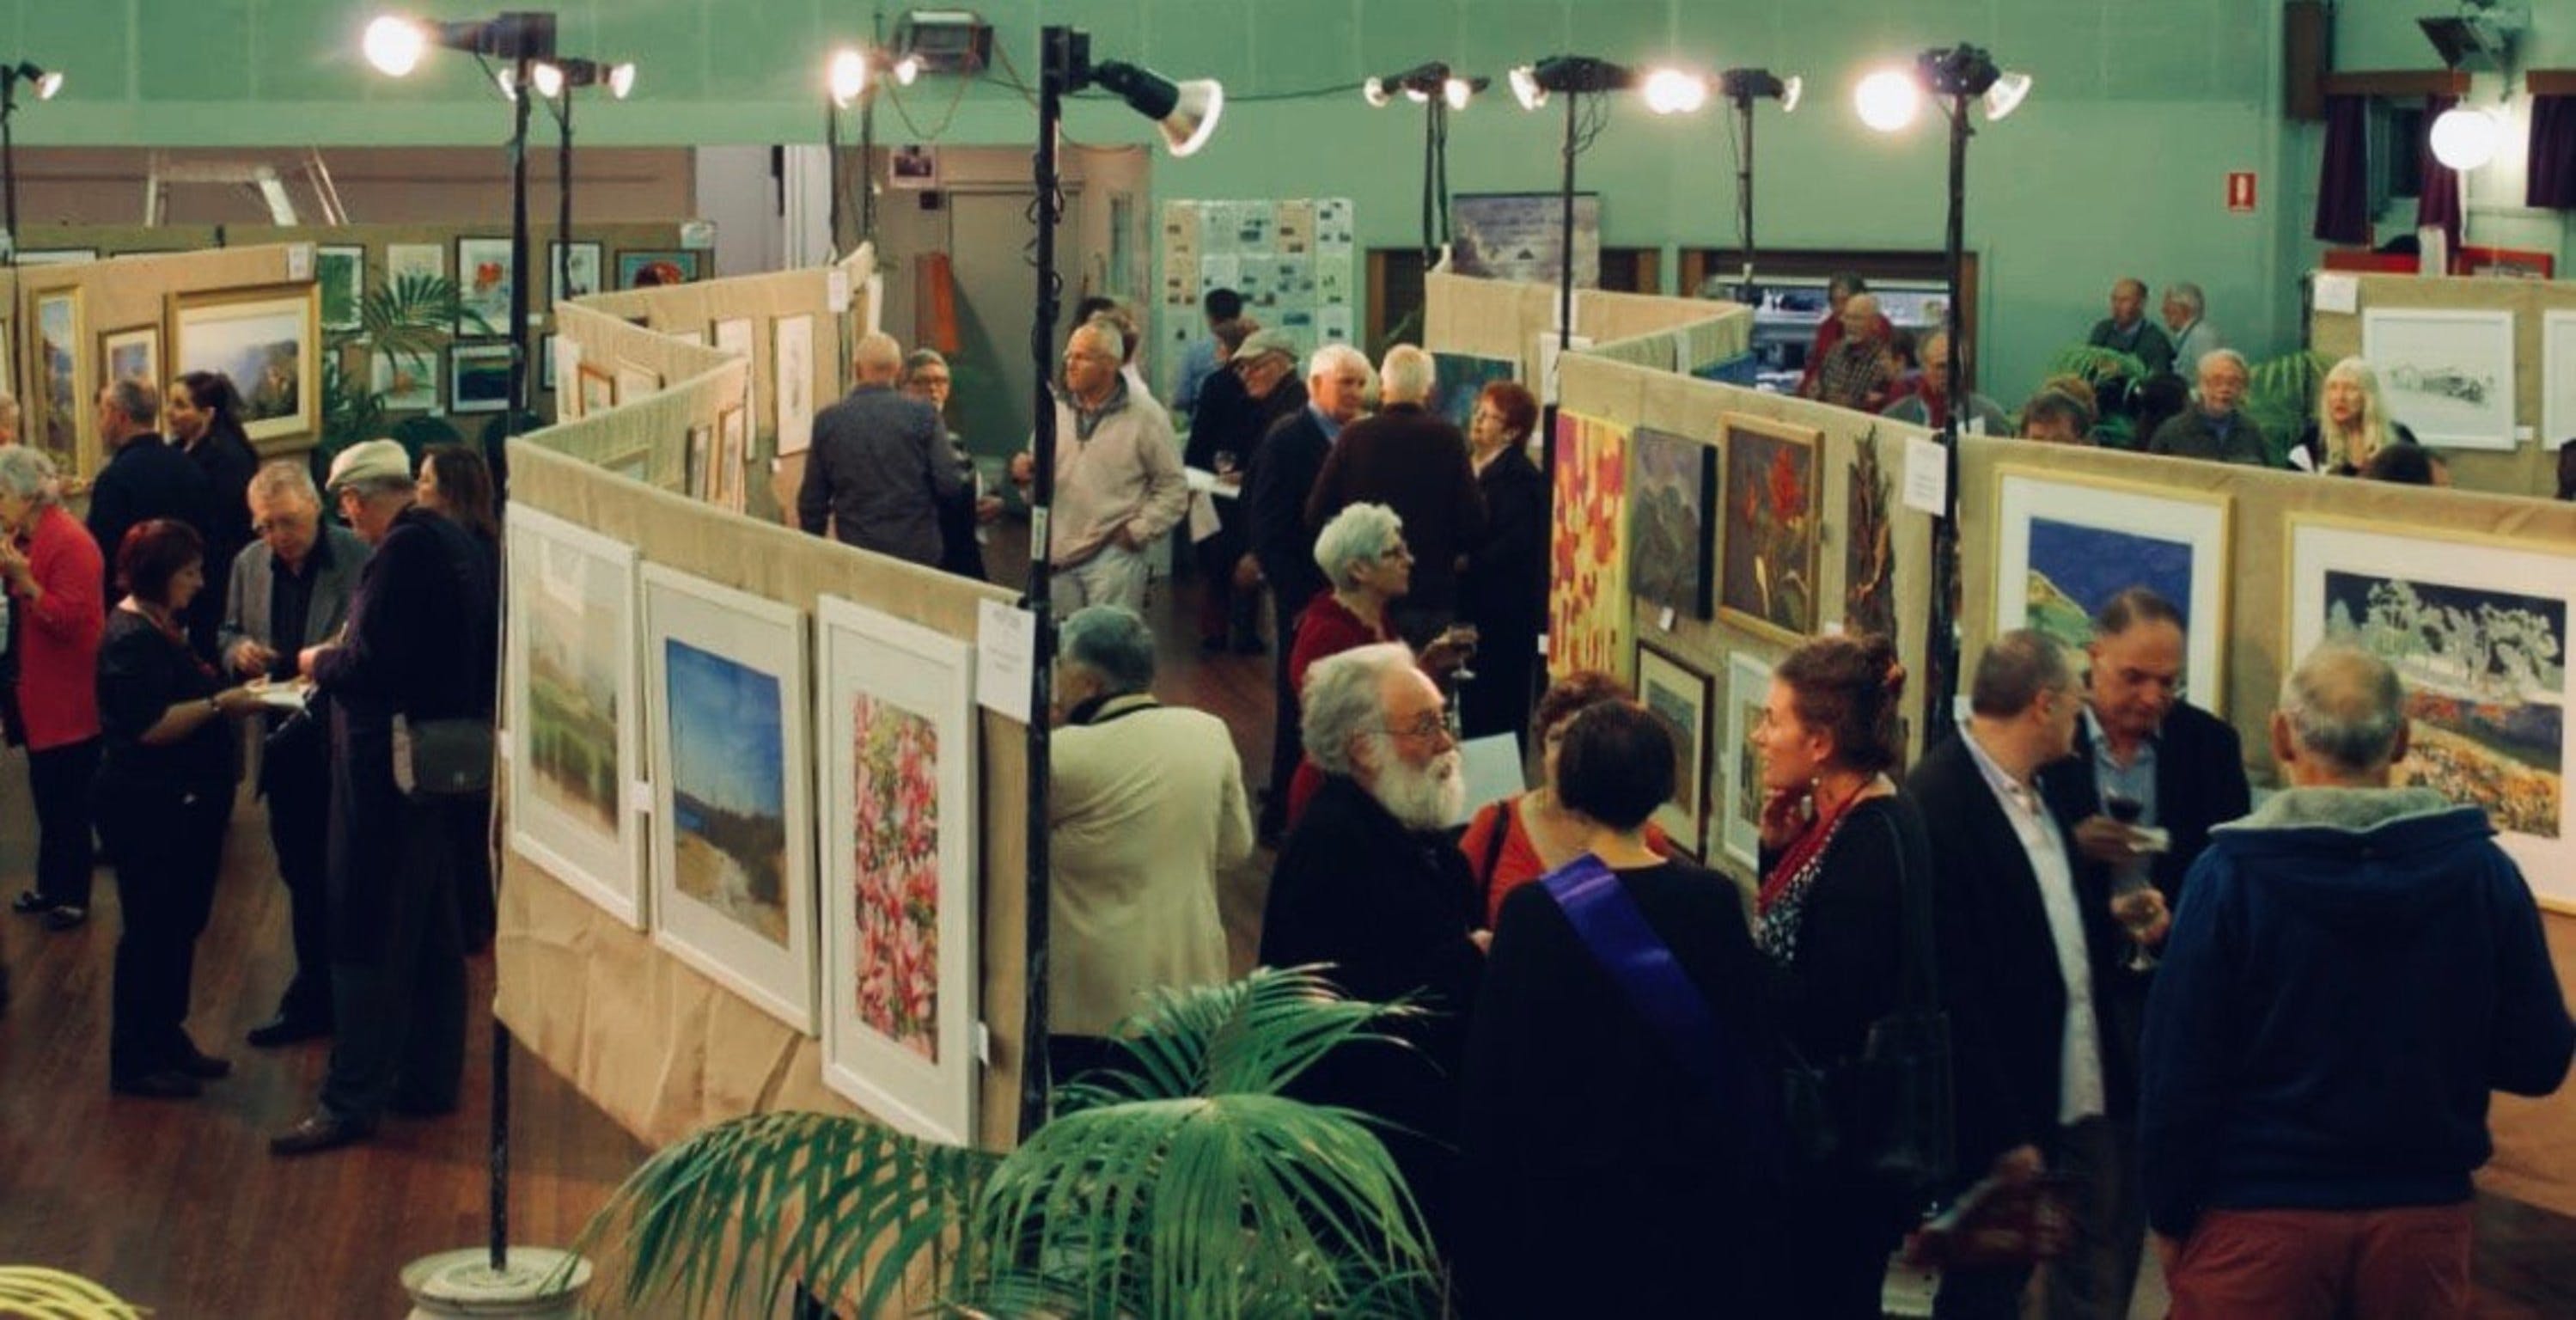 Blackheath Rhododendron Art Show - Accommodation Bookings